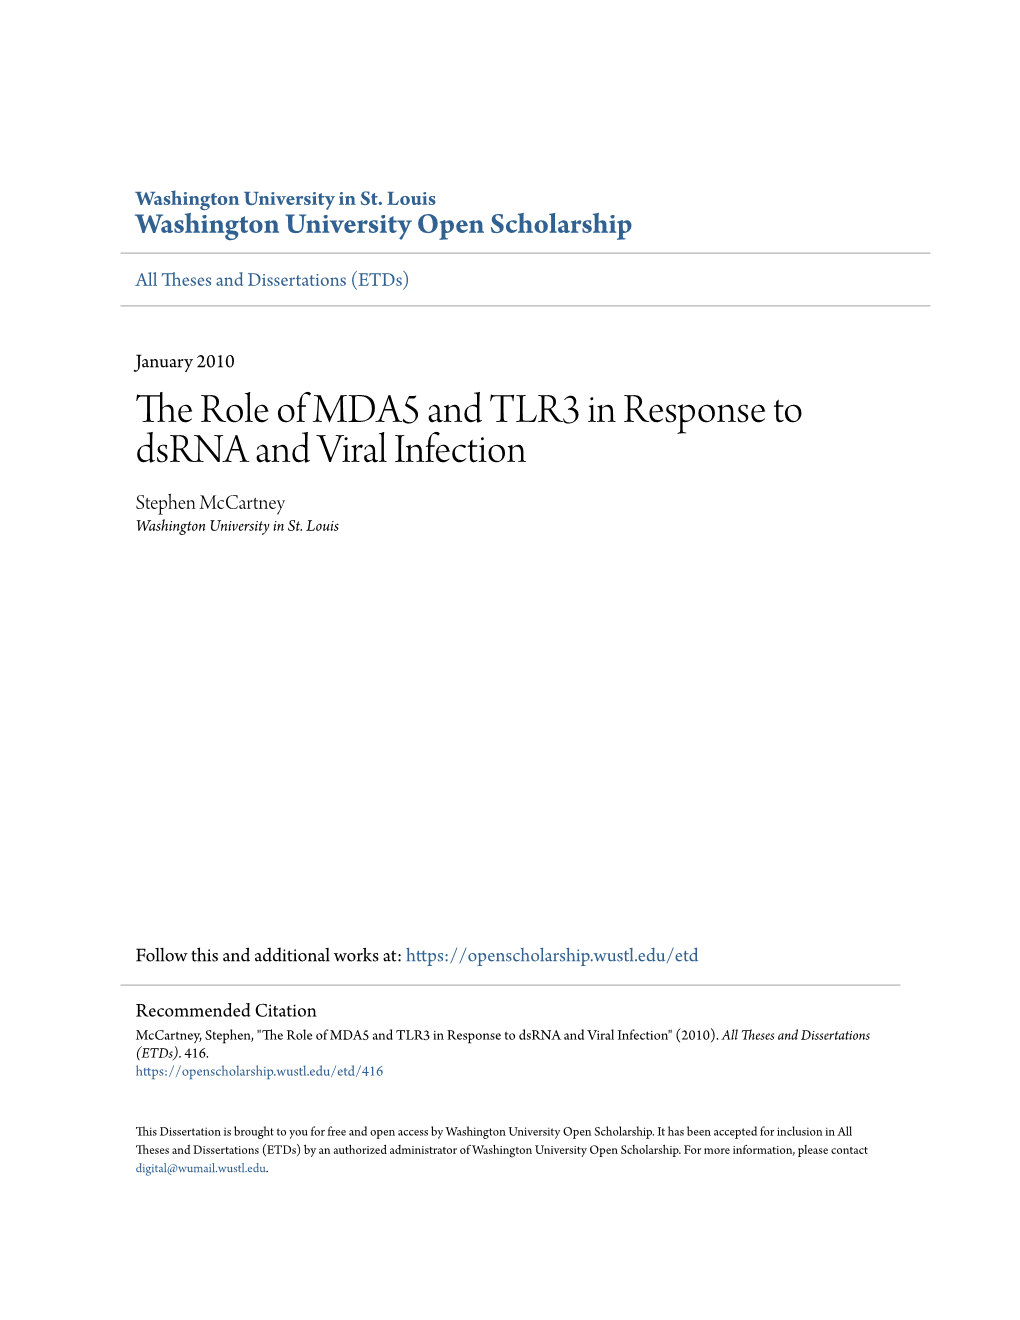 The Role of MDA5 and TLR3 in Response to Dsrna and Viral Infection Stephen Mccartney Washington University in St